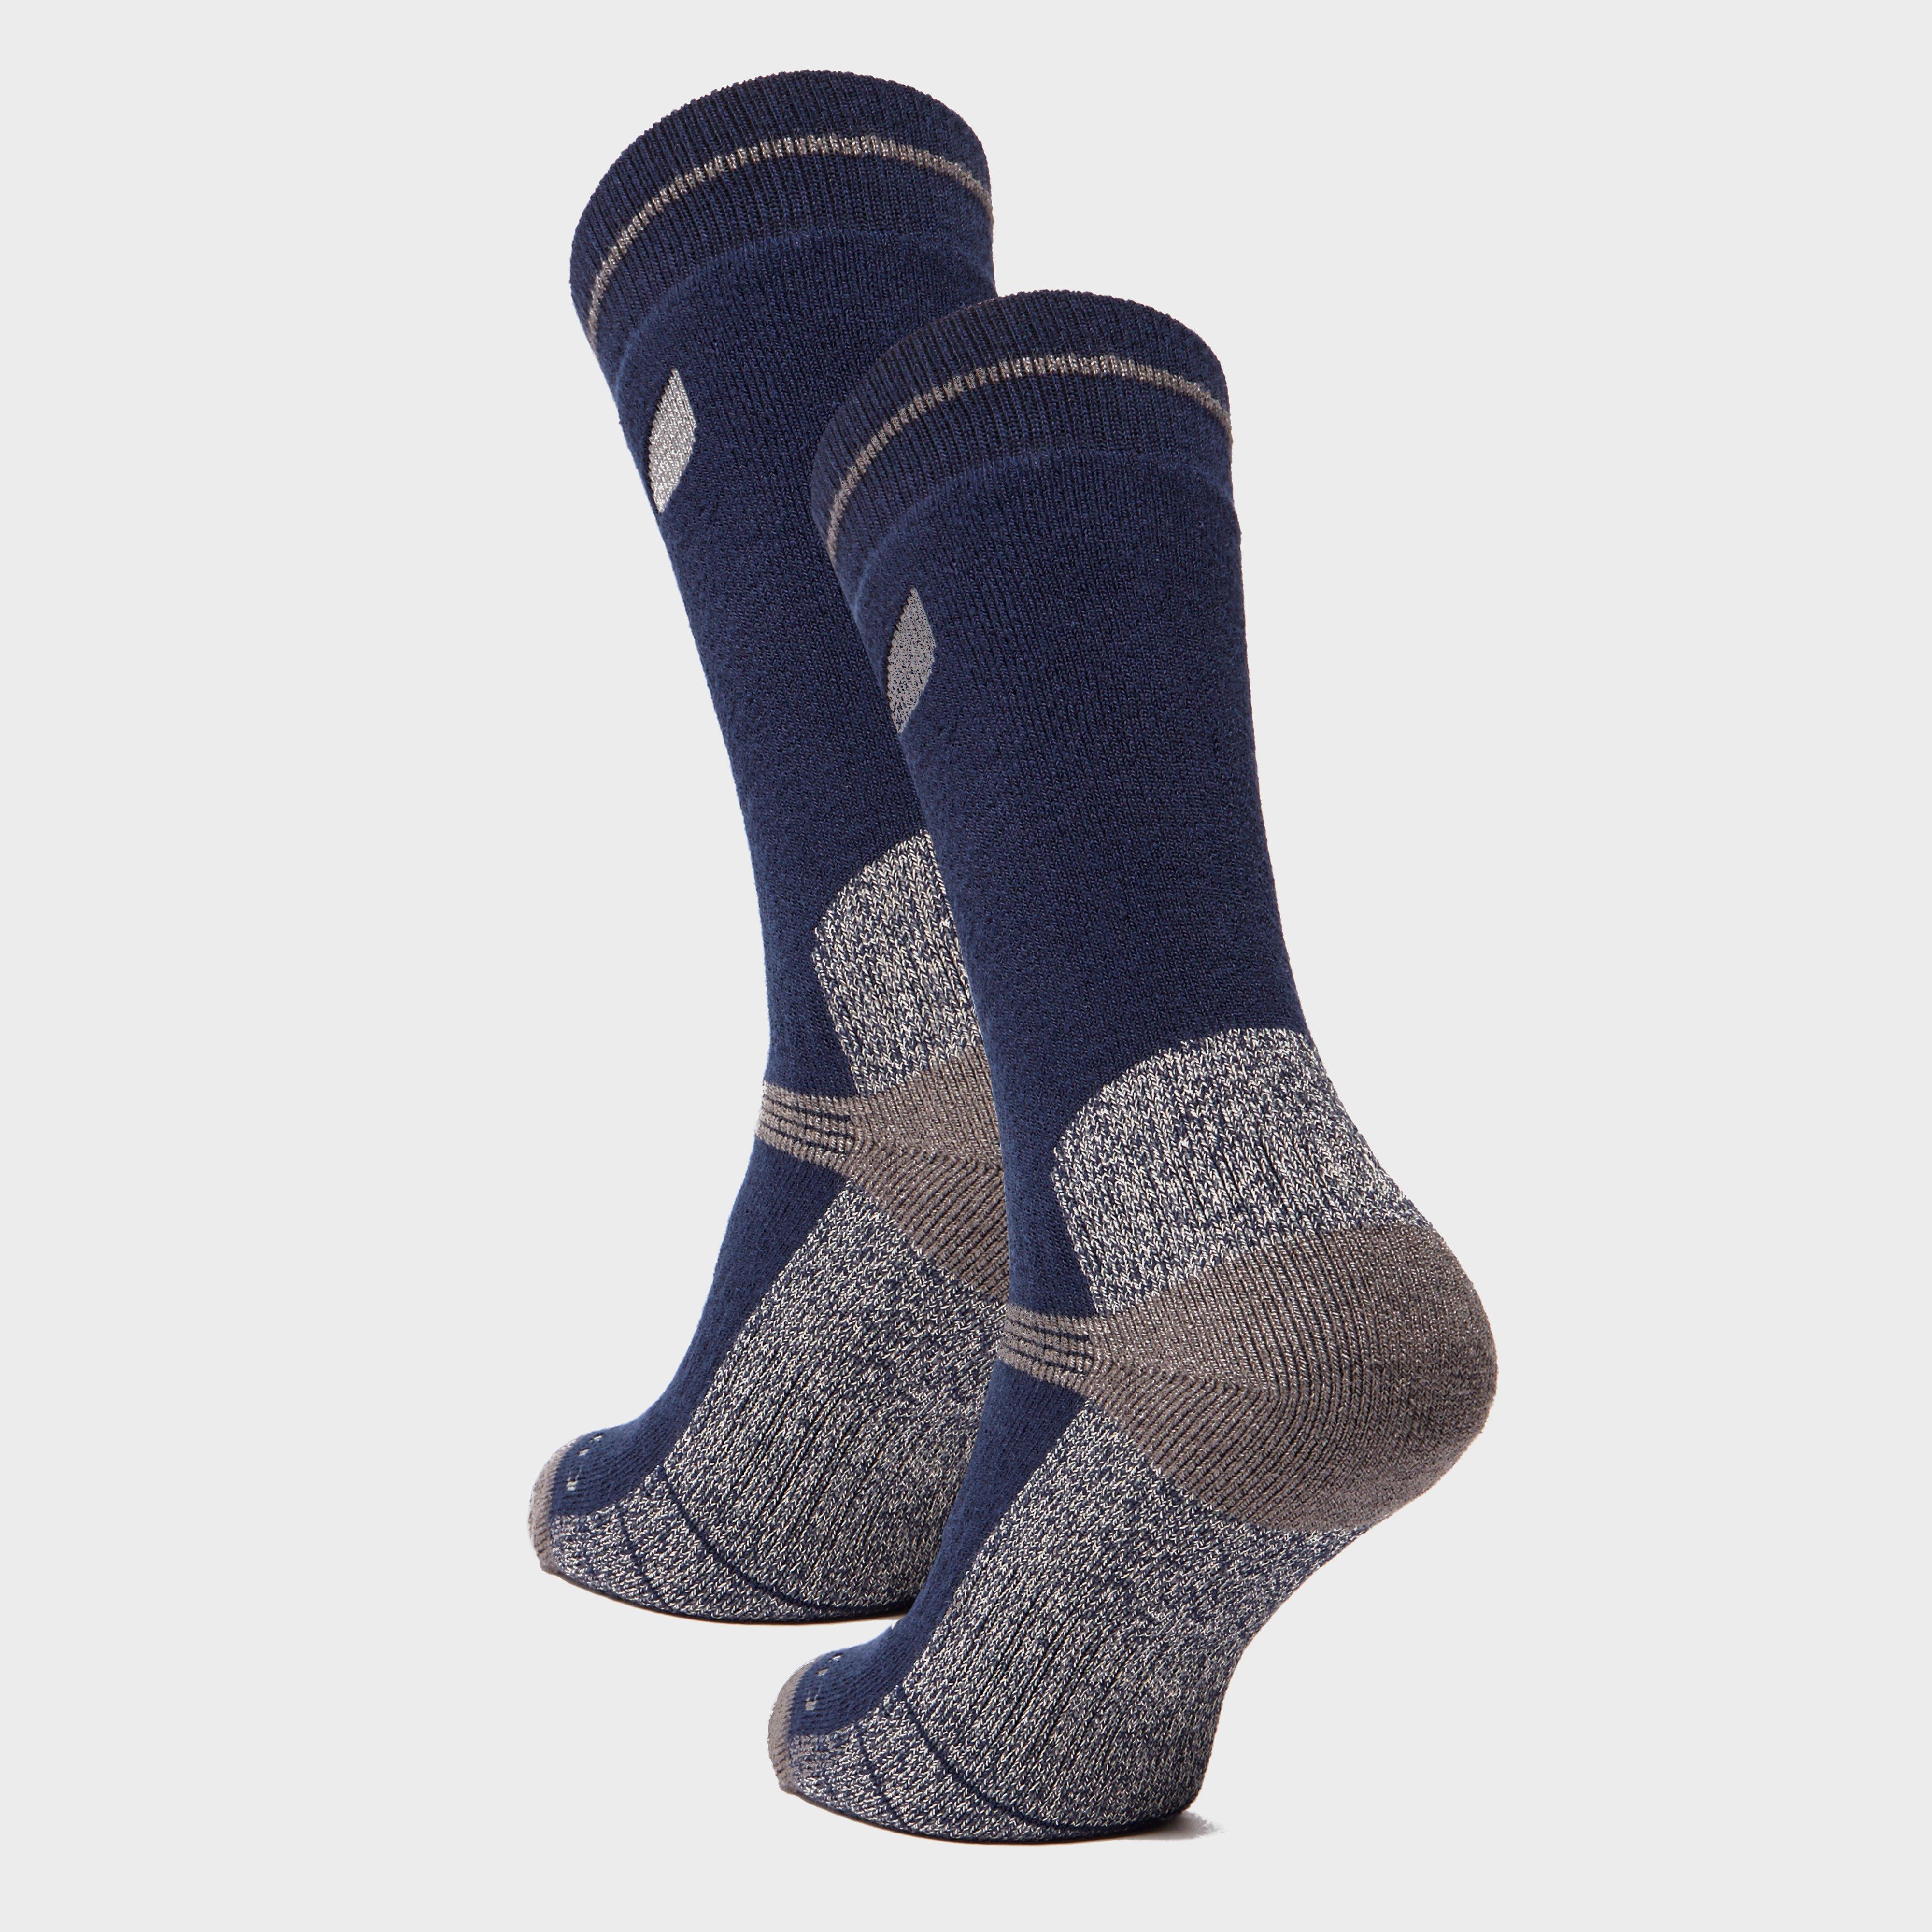 Peter Storm Men's Midweight Outdoor Socks (2 Pairs) Review